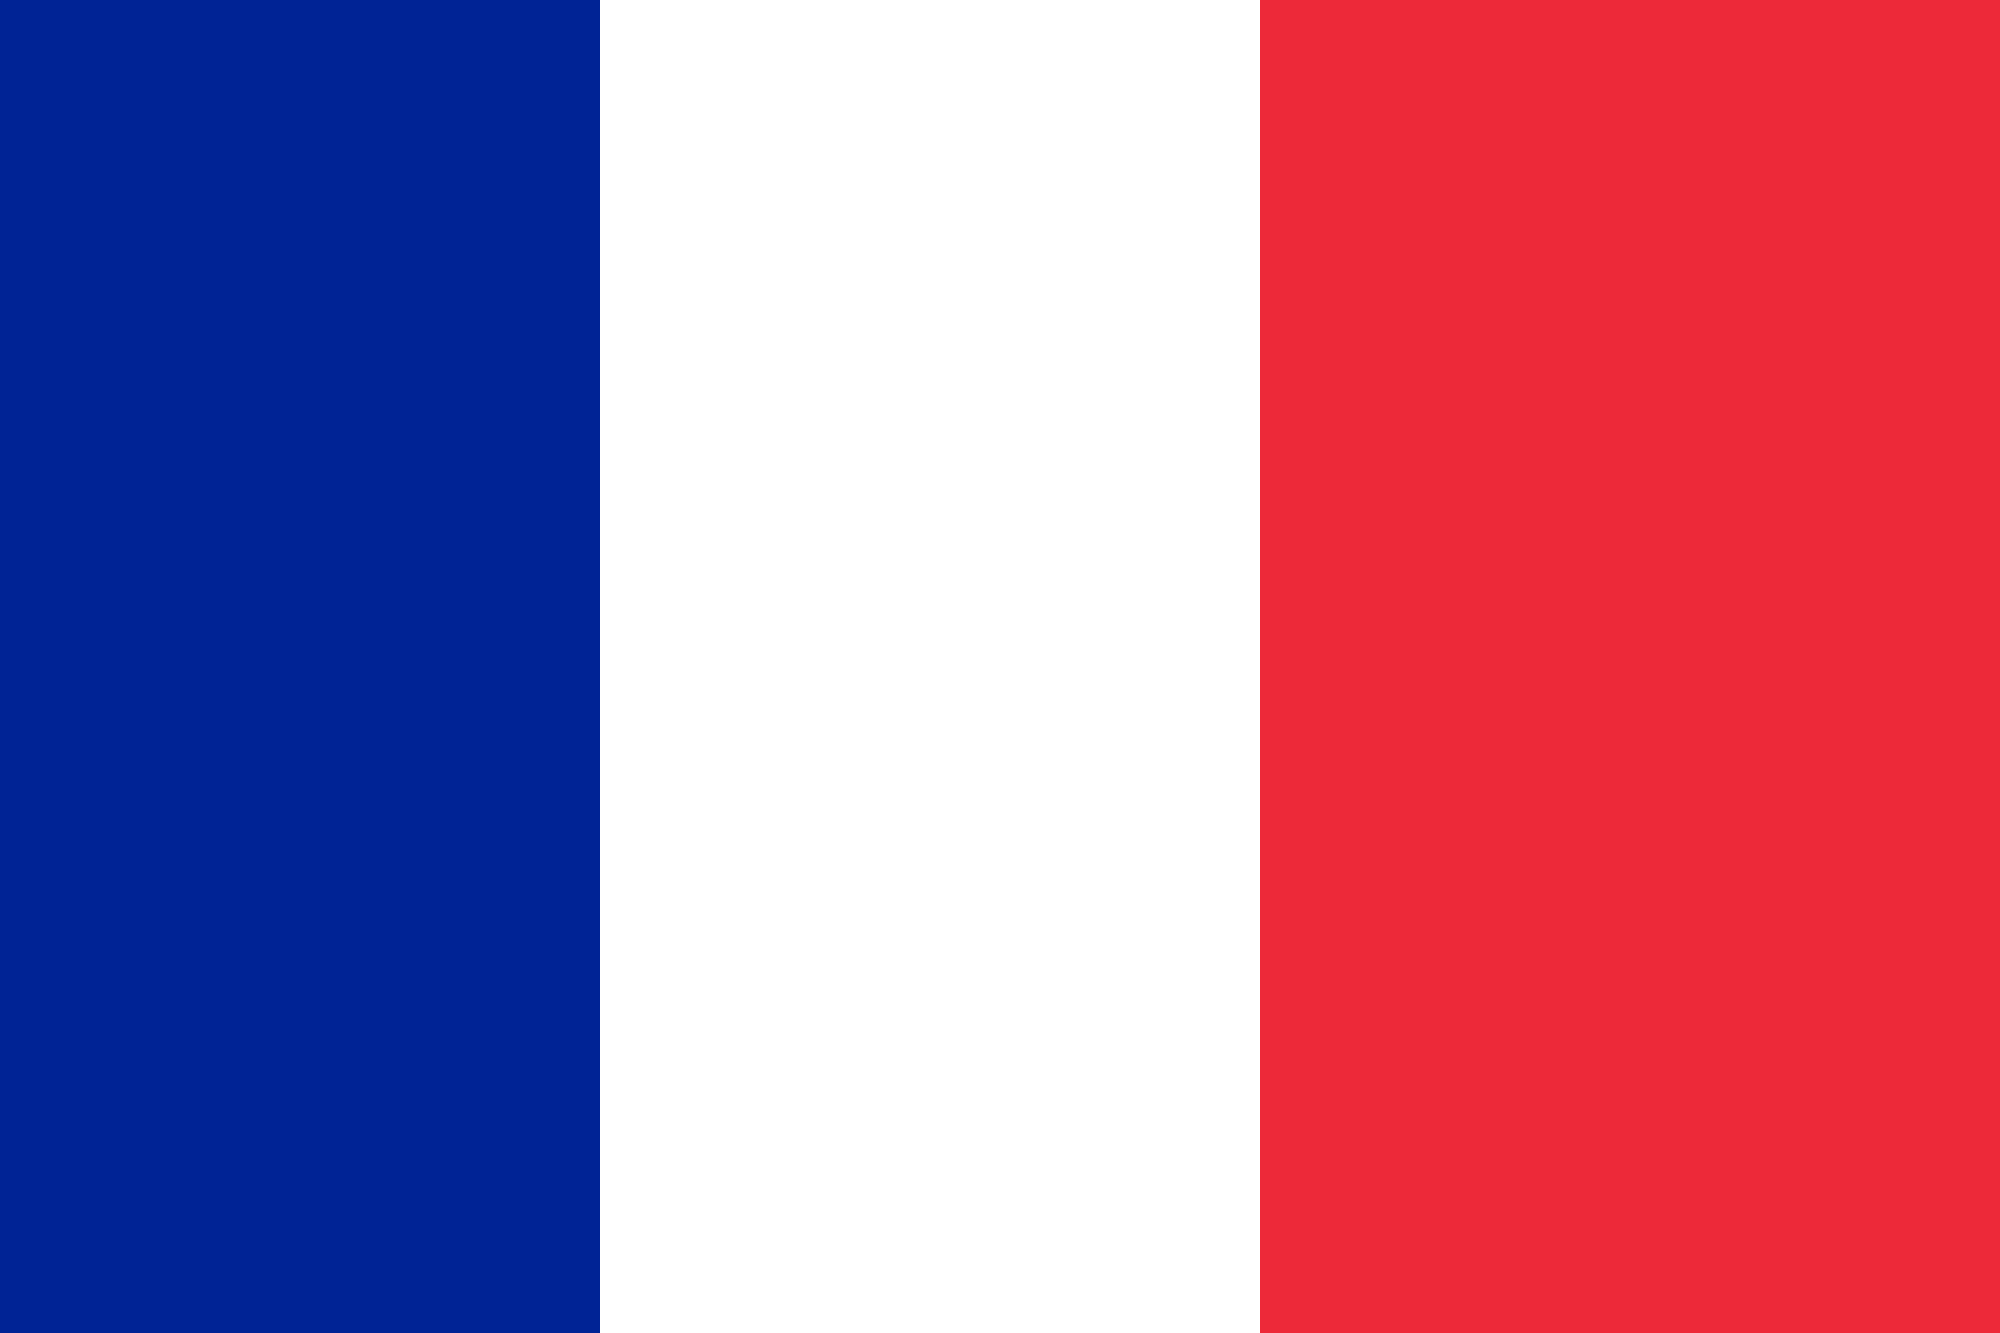 https://upload.wikimedia.org/wikipedia/commons/thumb/5/54/Civil_and_Naval_Ensign_of_France.svg/2000px-Civil_and_Naval_Ensign_of_France.svg.png